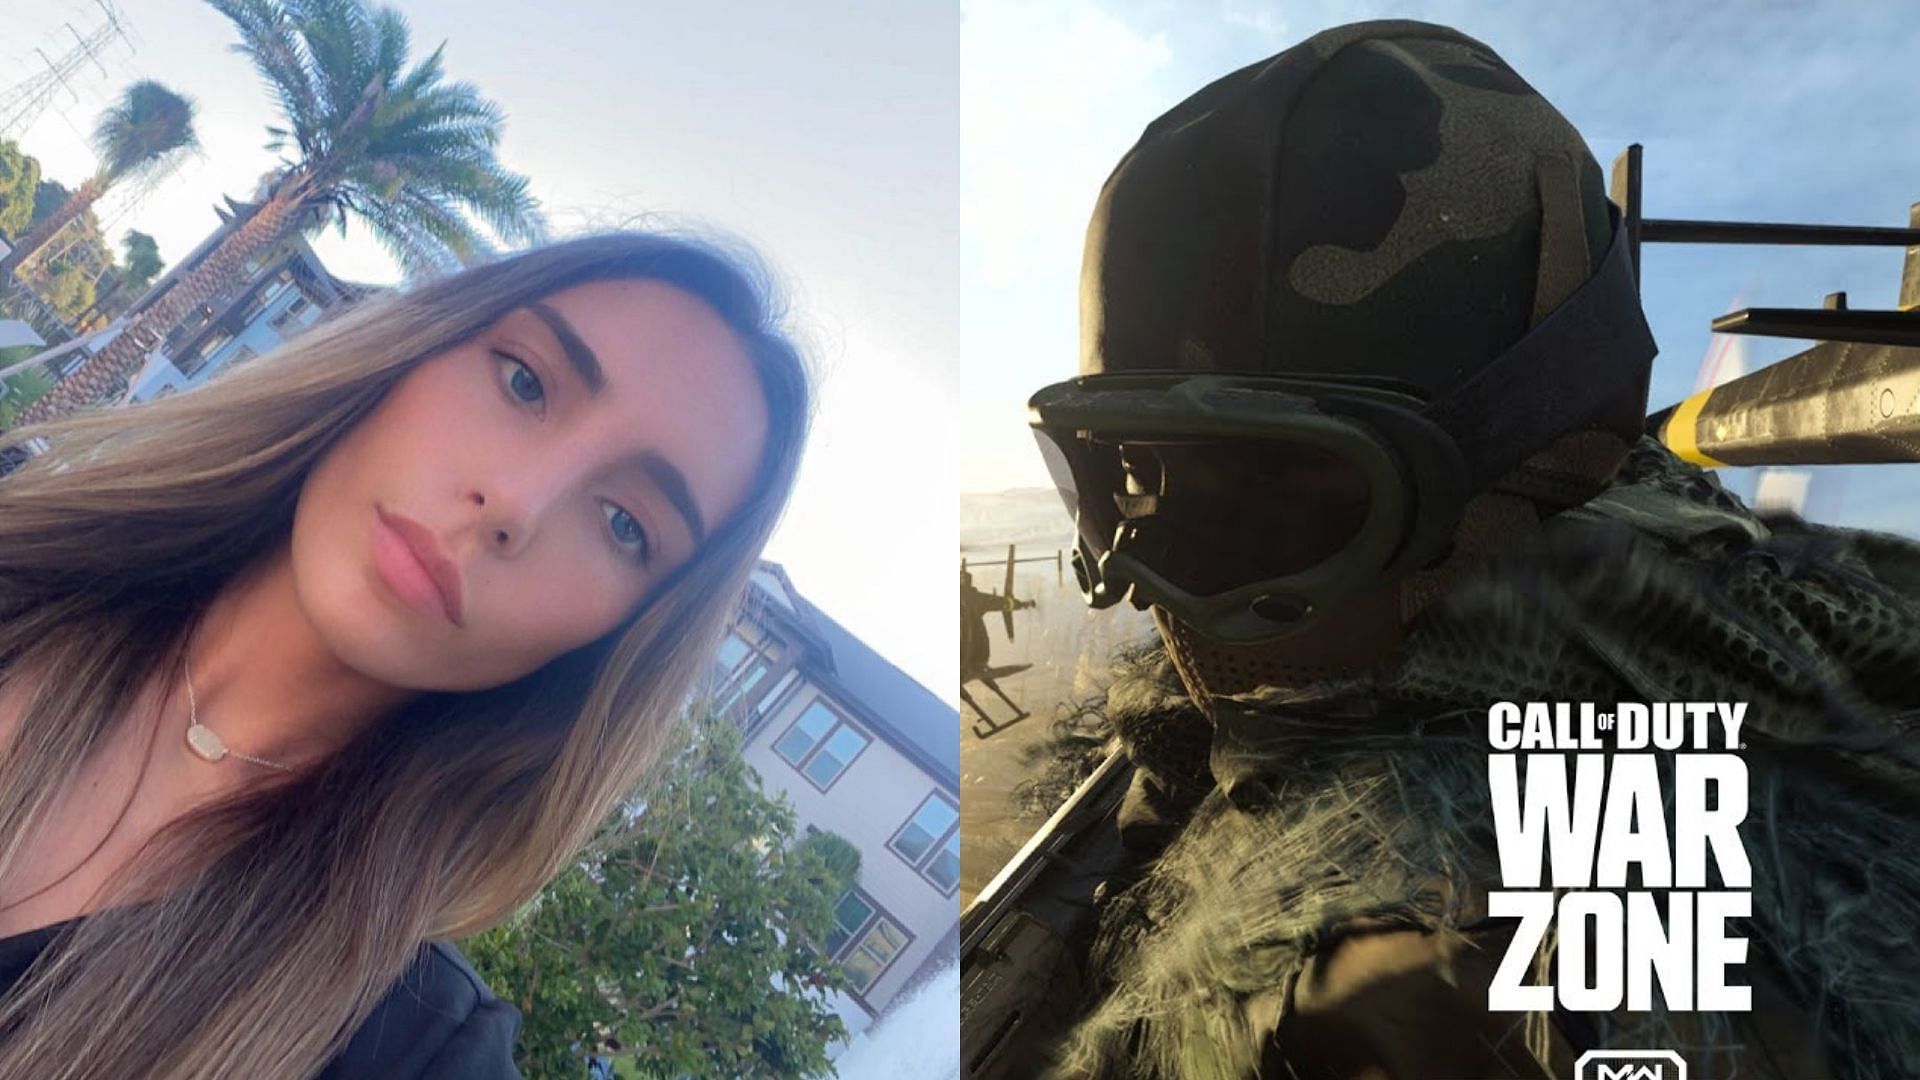 Twitter supports Warzone streamer Nadia after offensive TikTok goes viral (Image via Nadiakamine/Instagram, Call of Duty/YouTube)